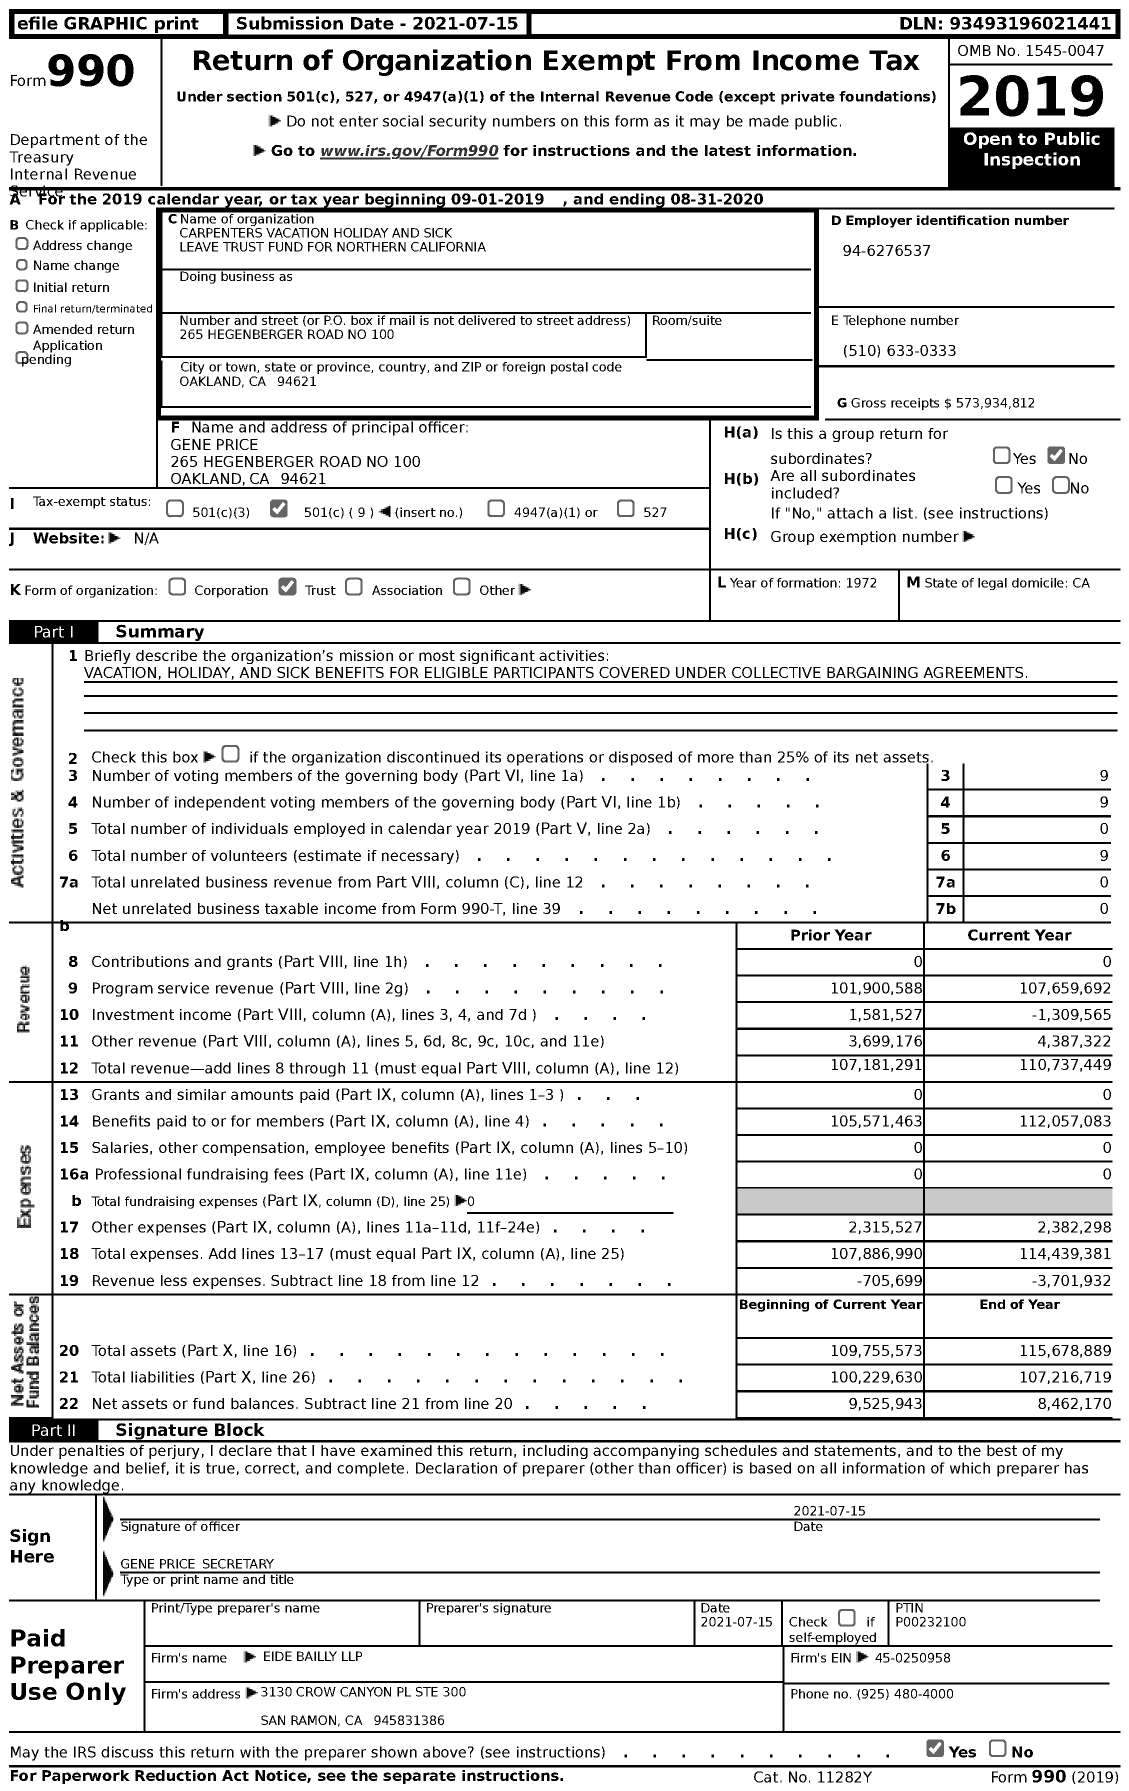 Image of first page of 2019 Form 990 for Carpenters Vacationholiday Holiday and Sick Leave Trust Fund for Northern California